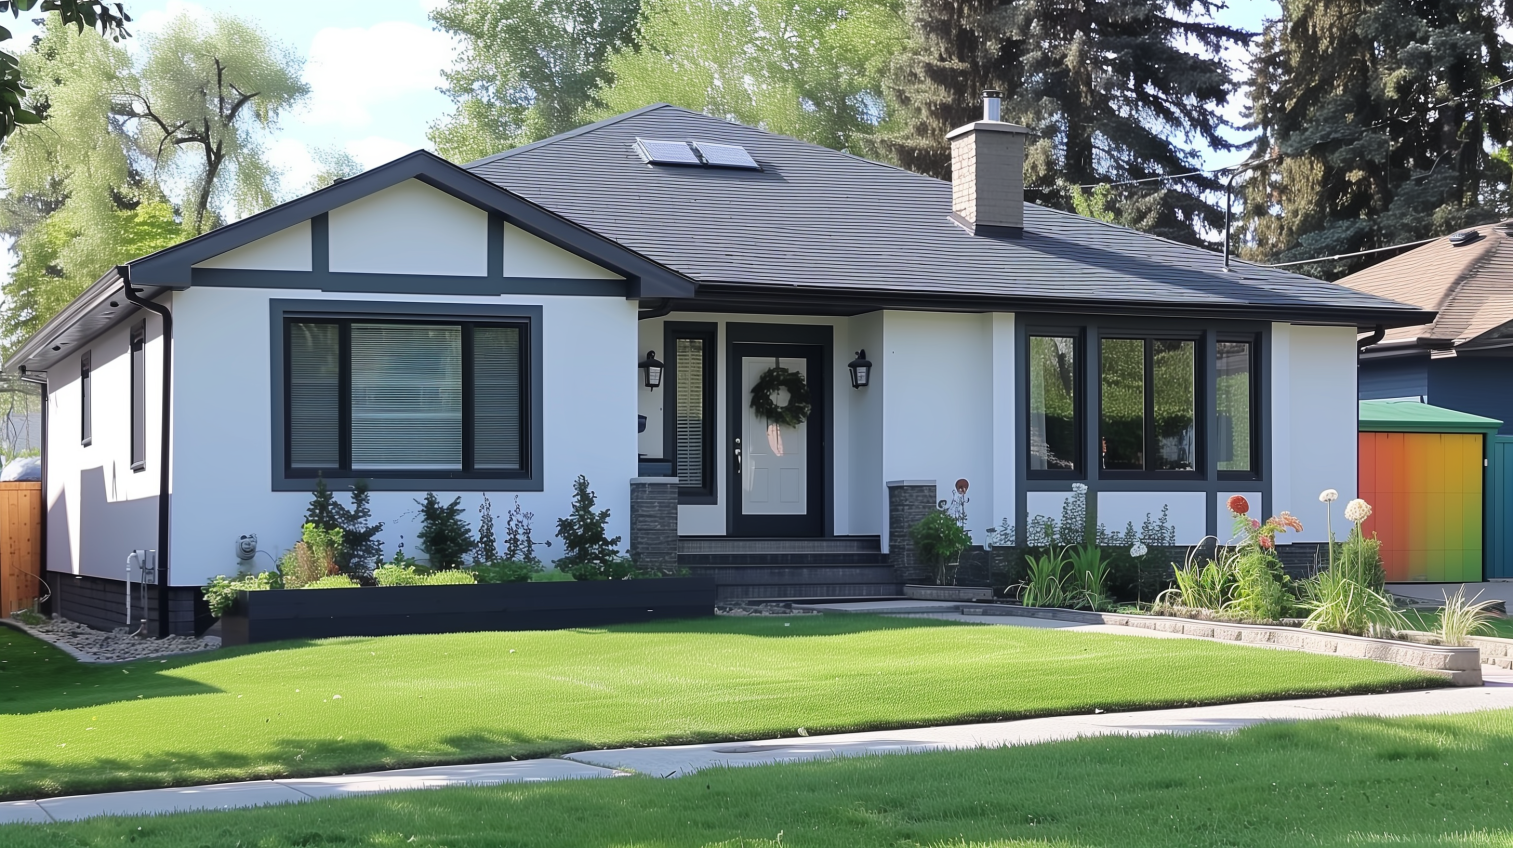 about Maximizing Your Energy Savings - How Upgrading to Energy-Efficient Windows Can Cut Costs in Calgary